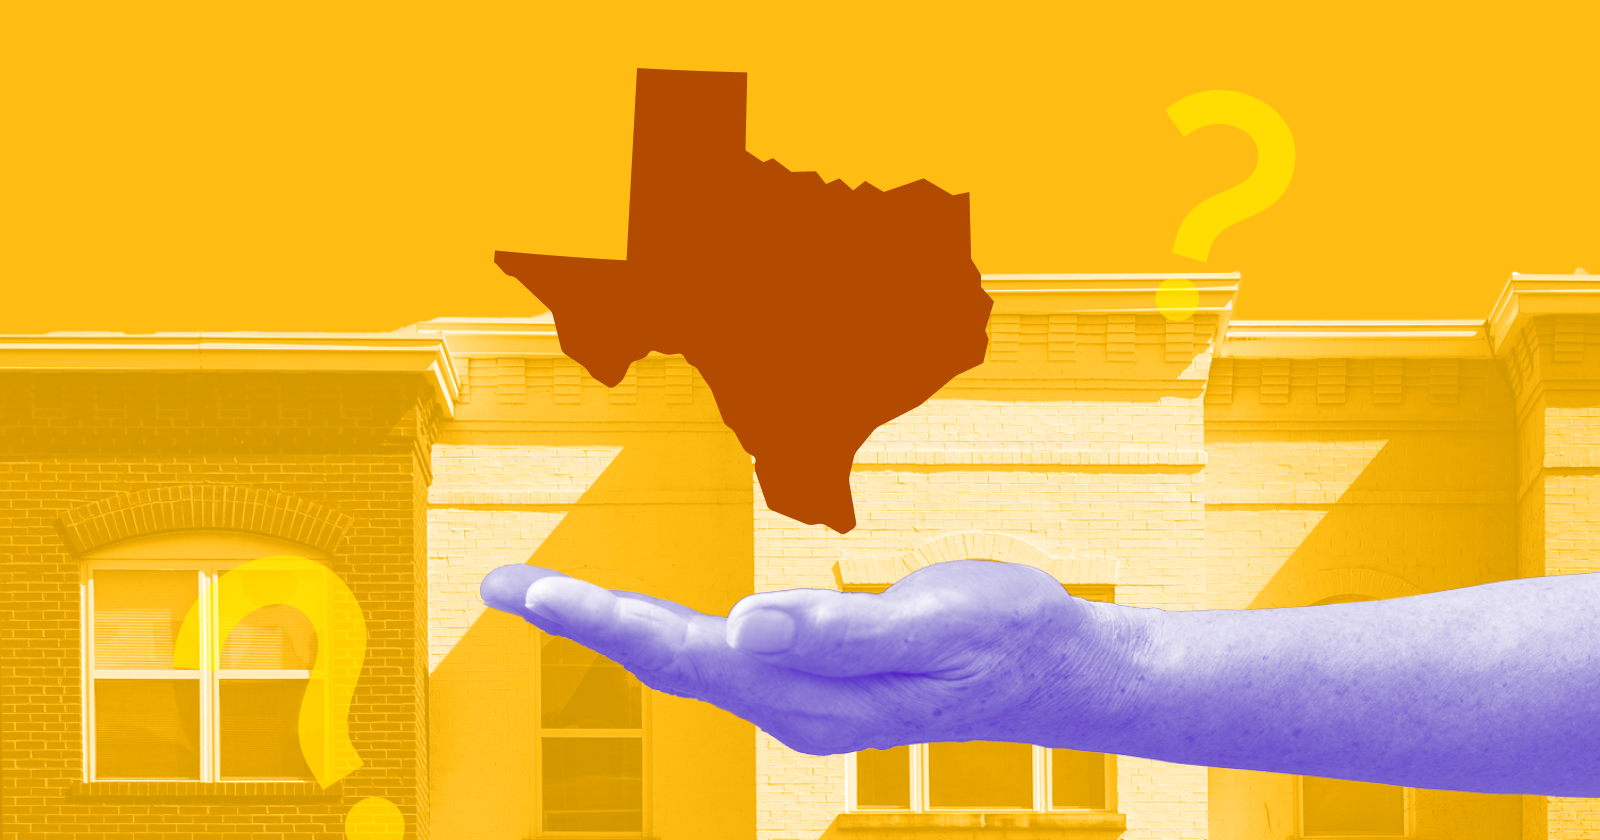 "First Time Homebuyer Programs in Texas - Extended Hand with State of Texas